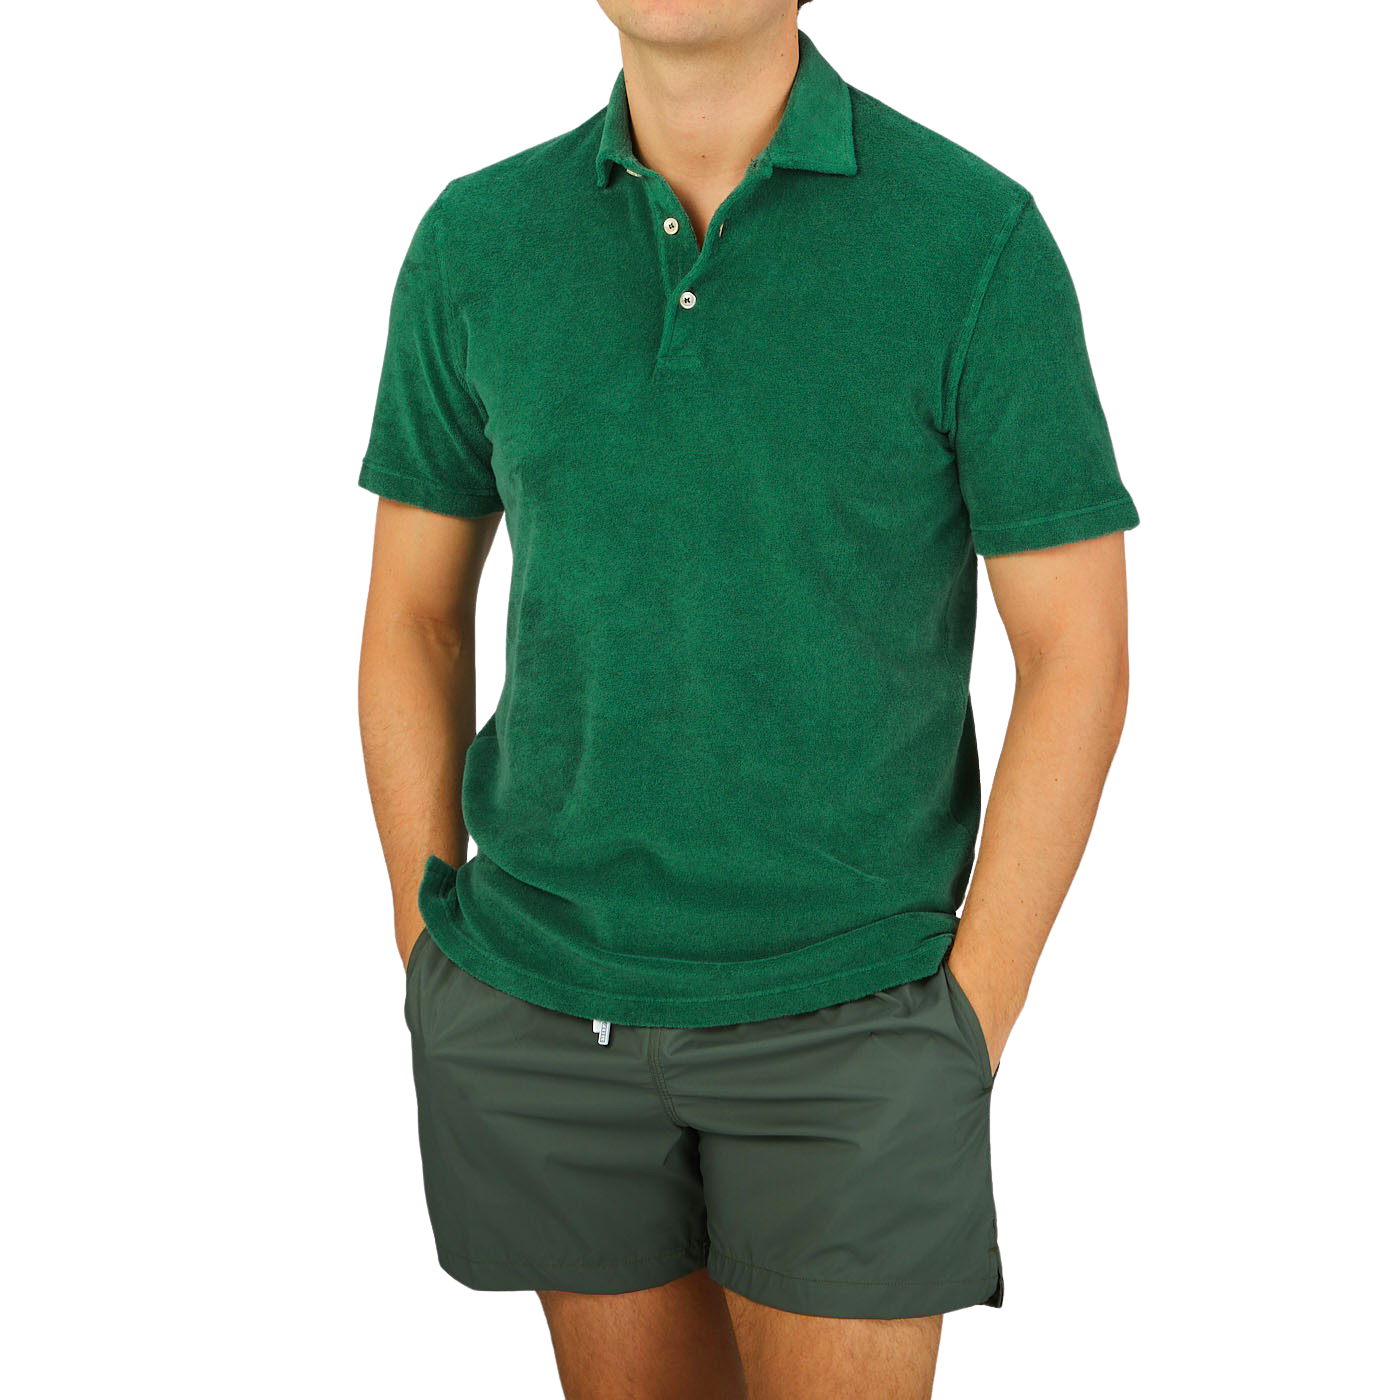 Baltzar, wearing a Fedeli Grass Green Cotton Towelling Polo Shirt and shorts.